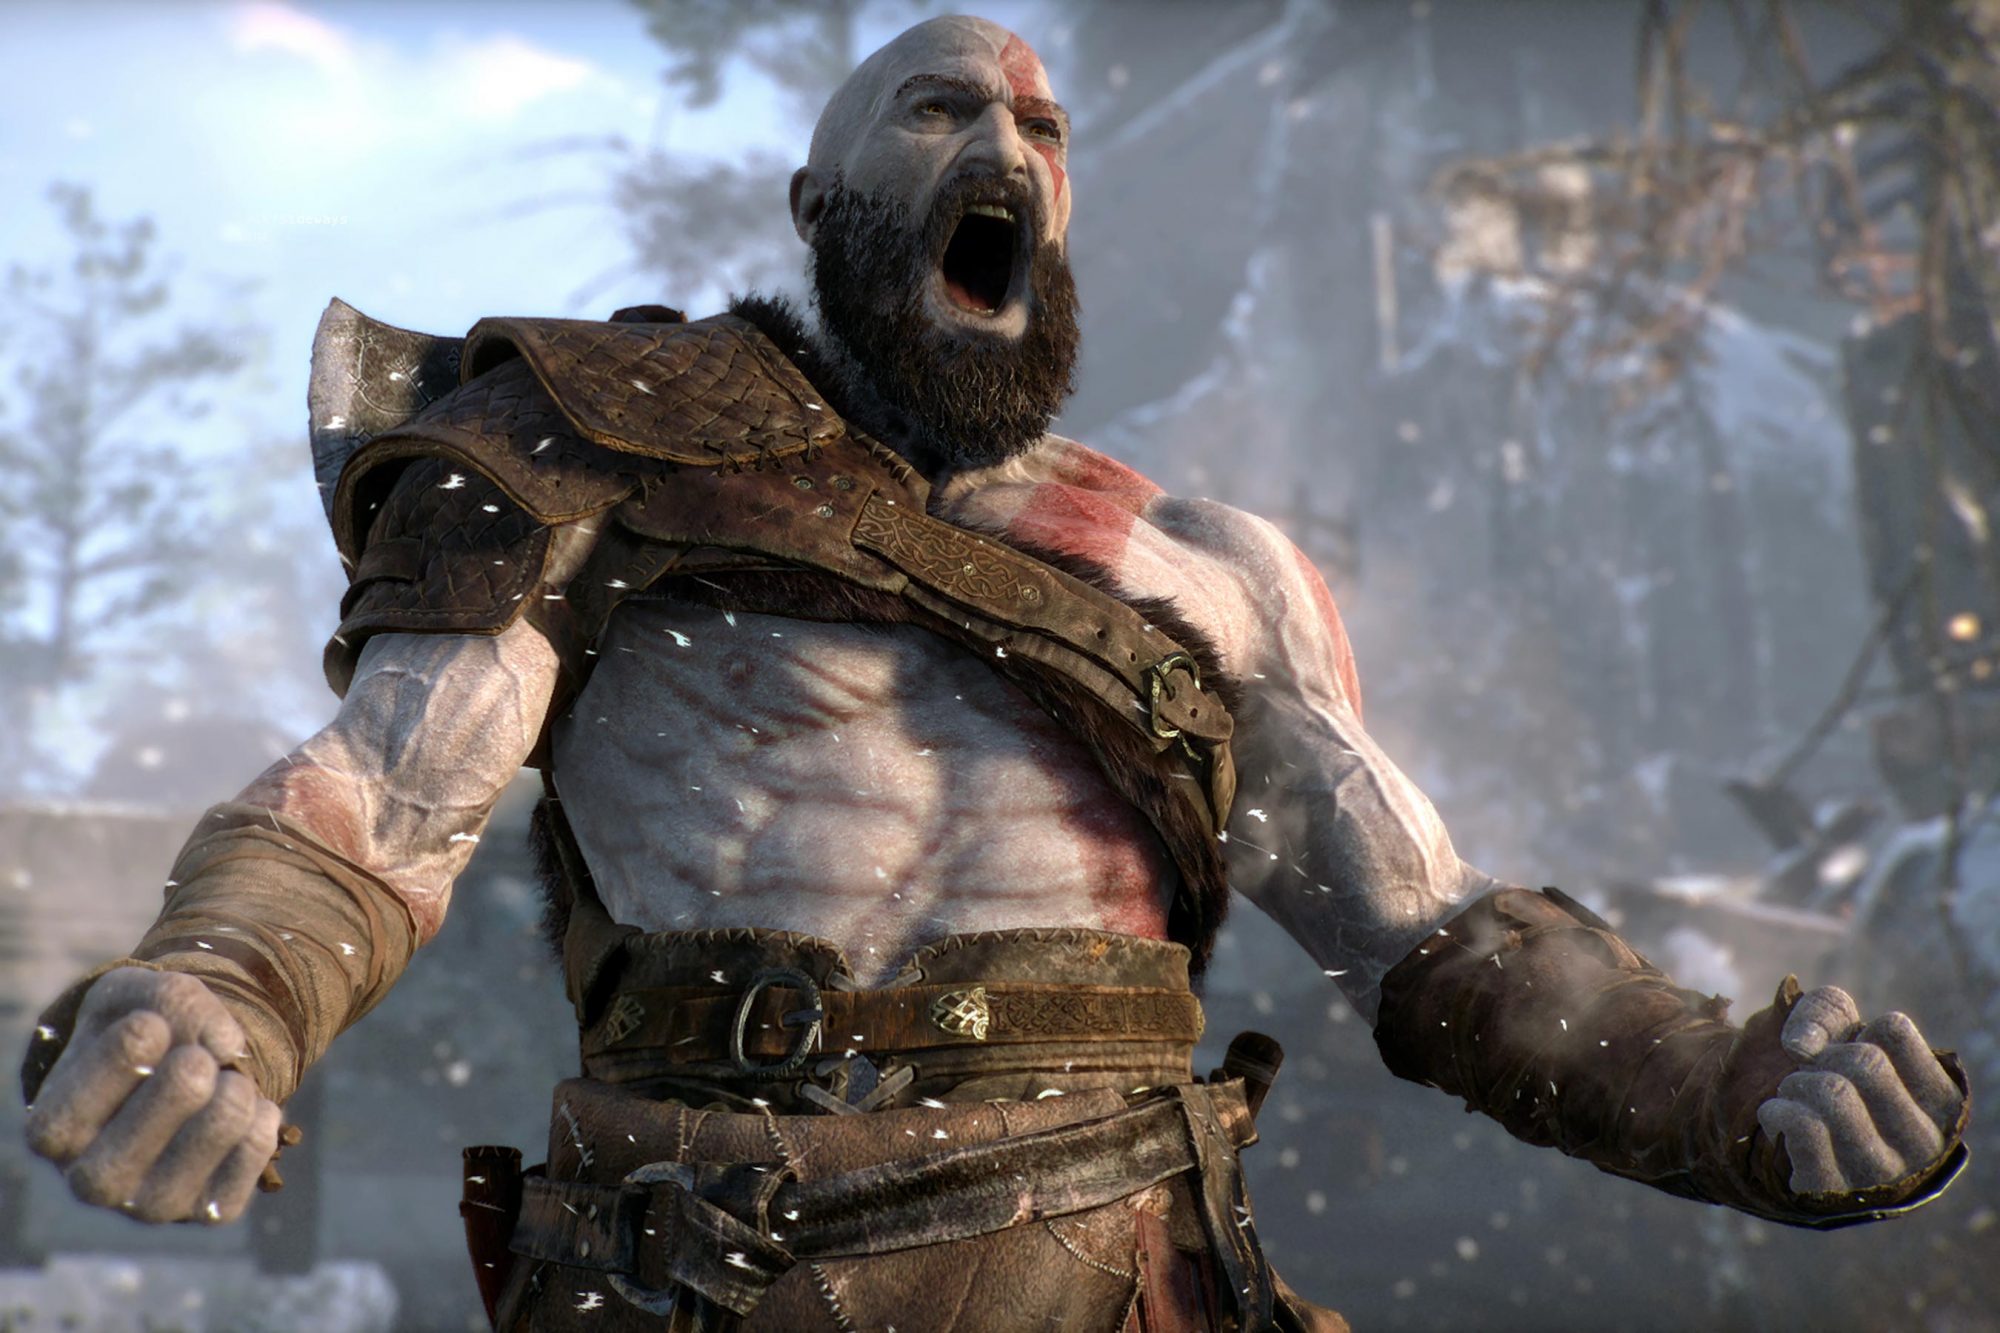 God of War video game (2018) CR: Sony Interactive Entertainment